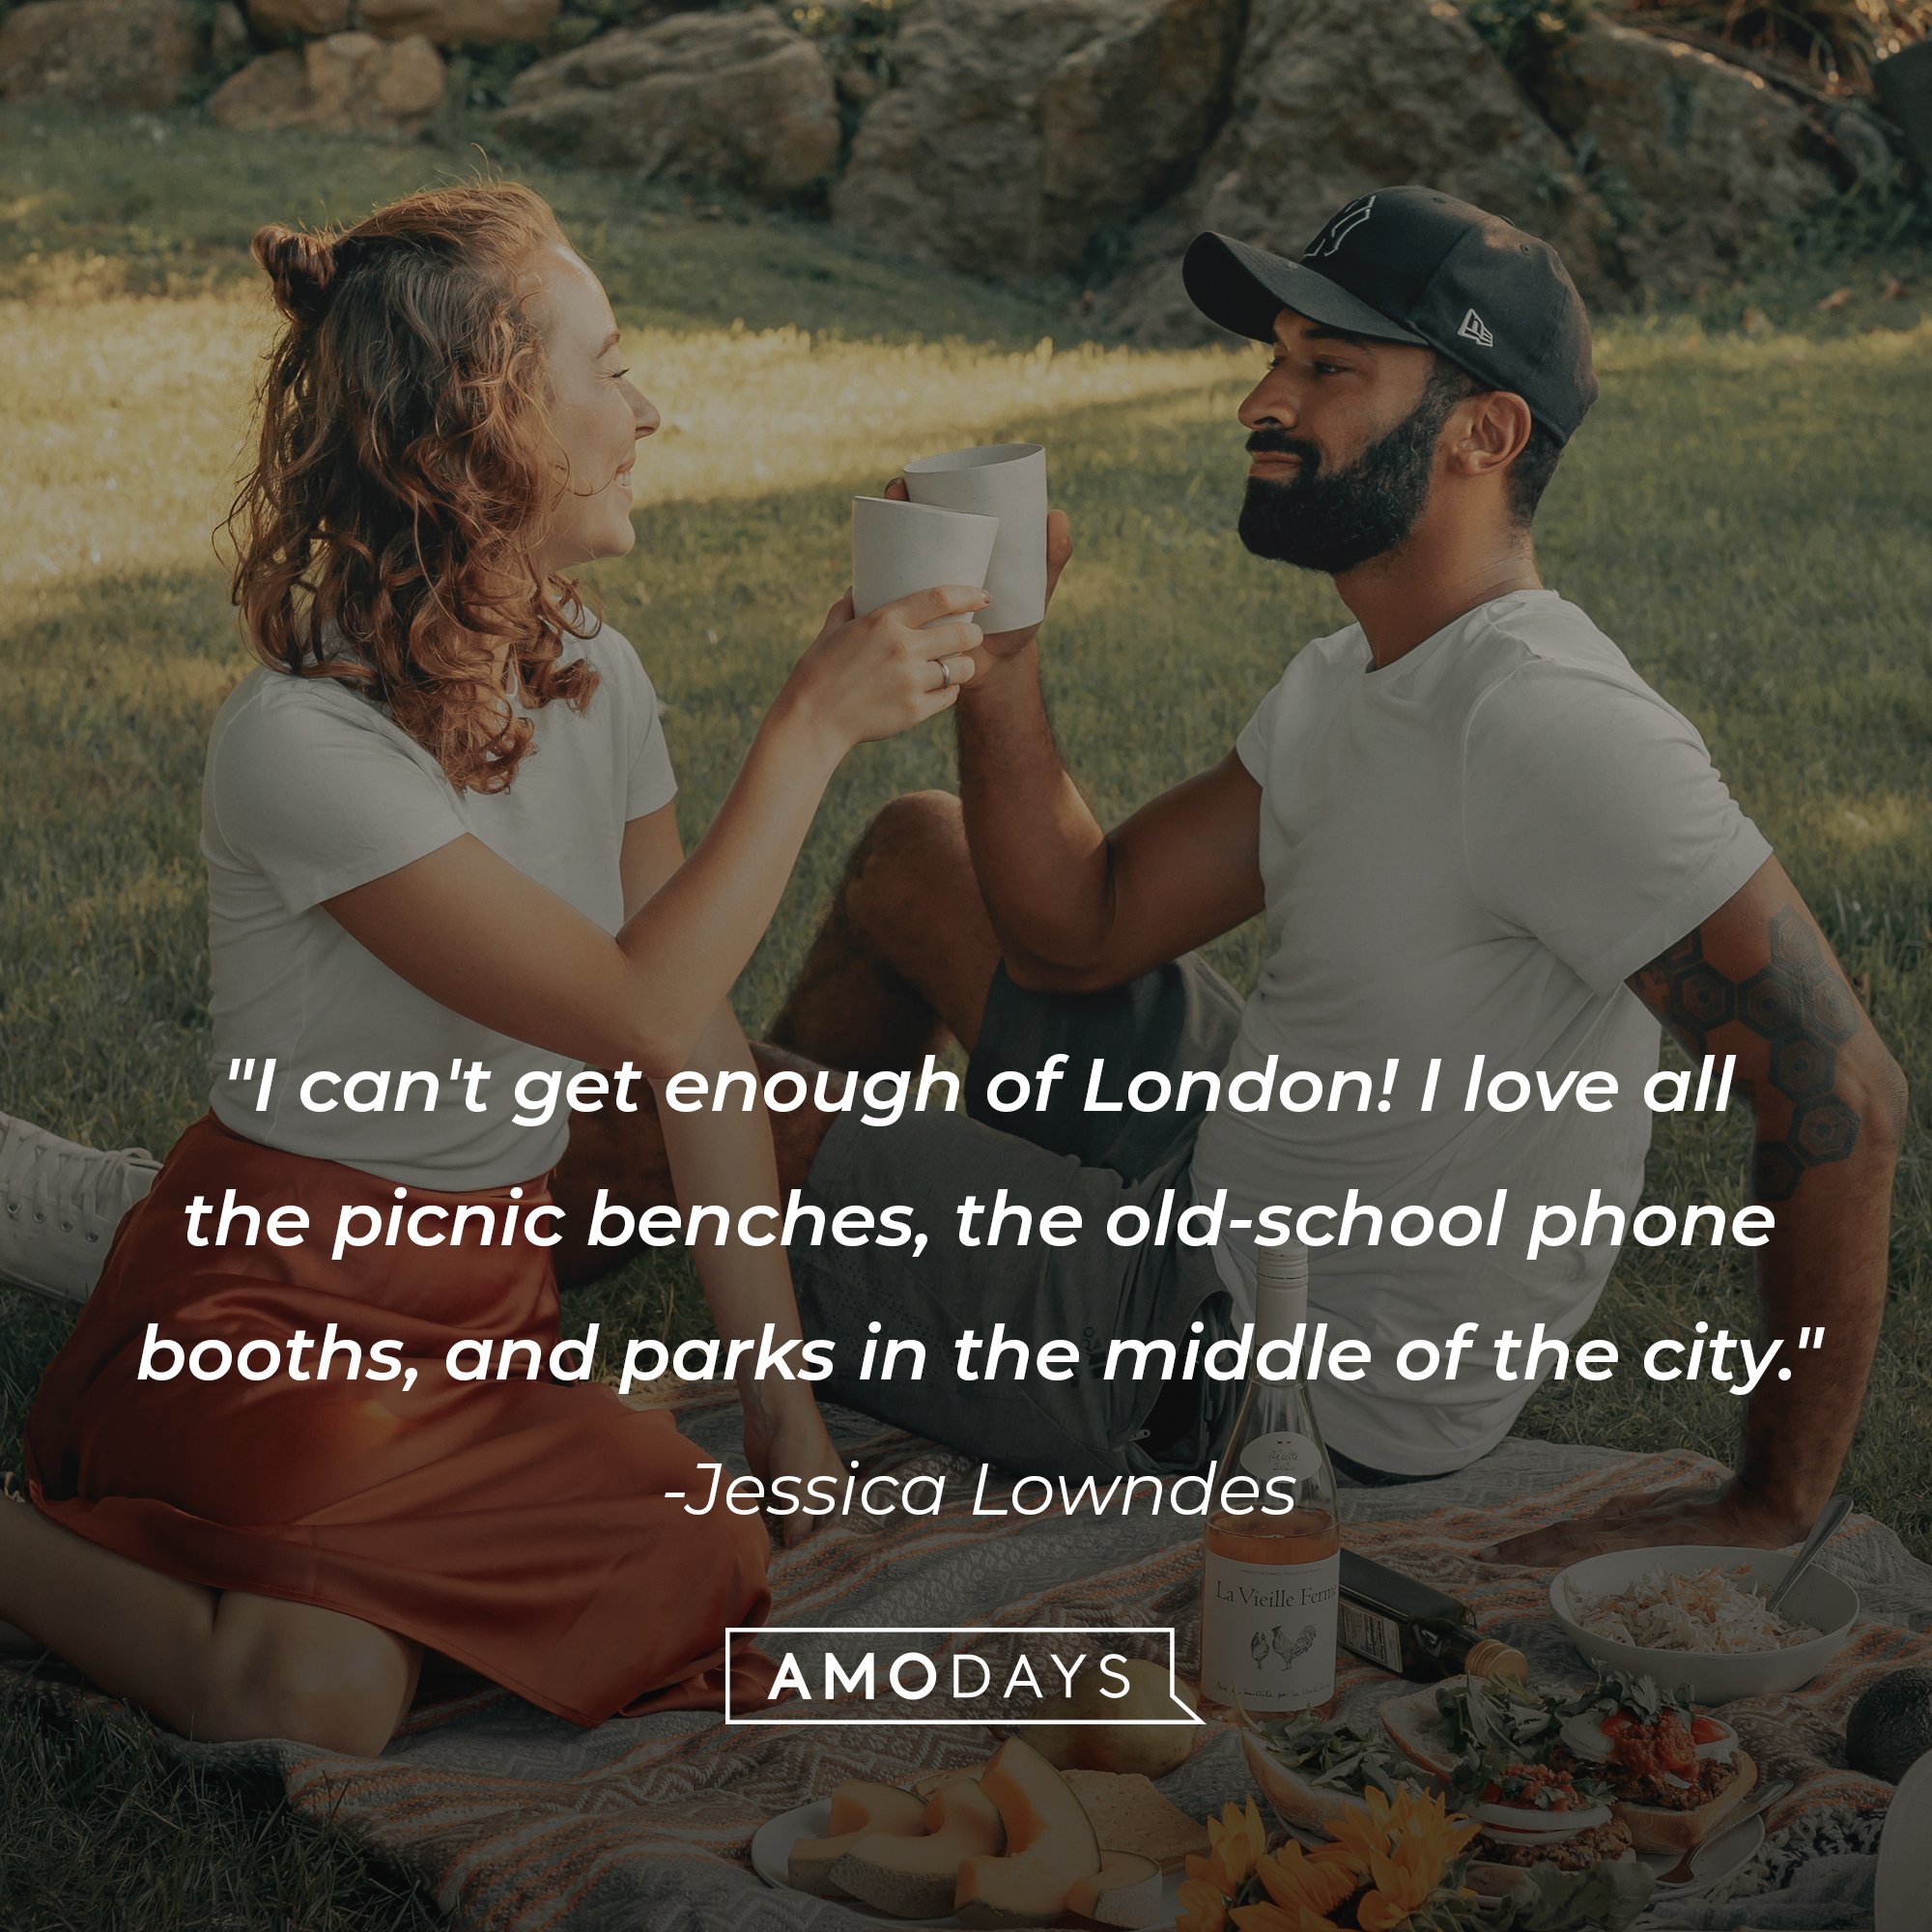 Jessica Lowndes' quote: "I can't get enough of London! I love all the picnic benches, the old-school phone booths, and parks in the middle of the city." | Image: AmoDays